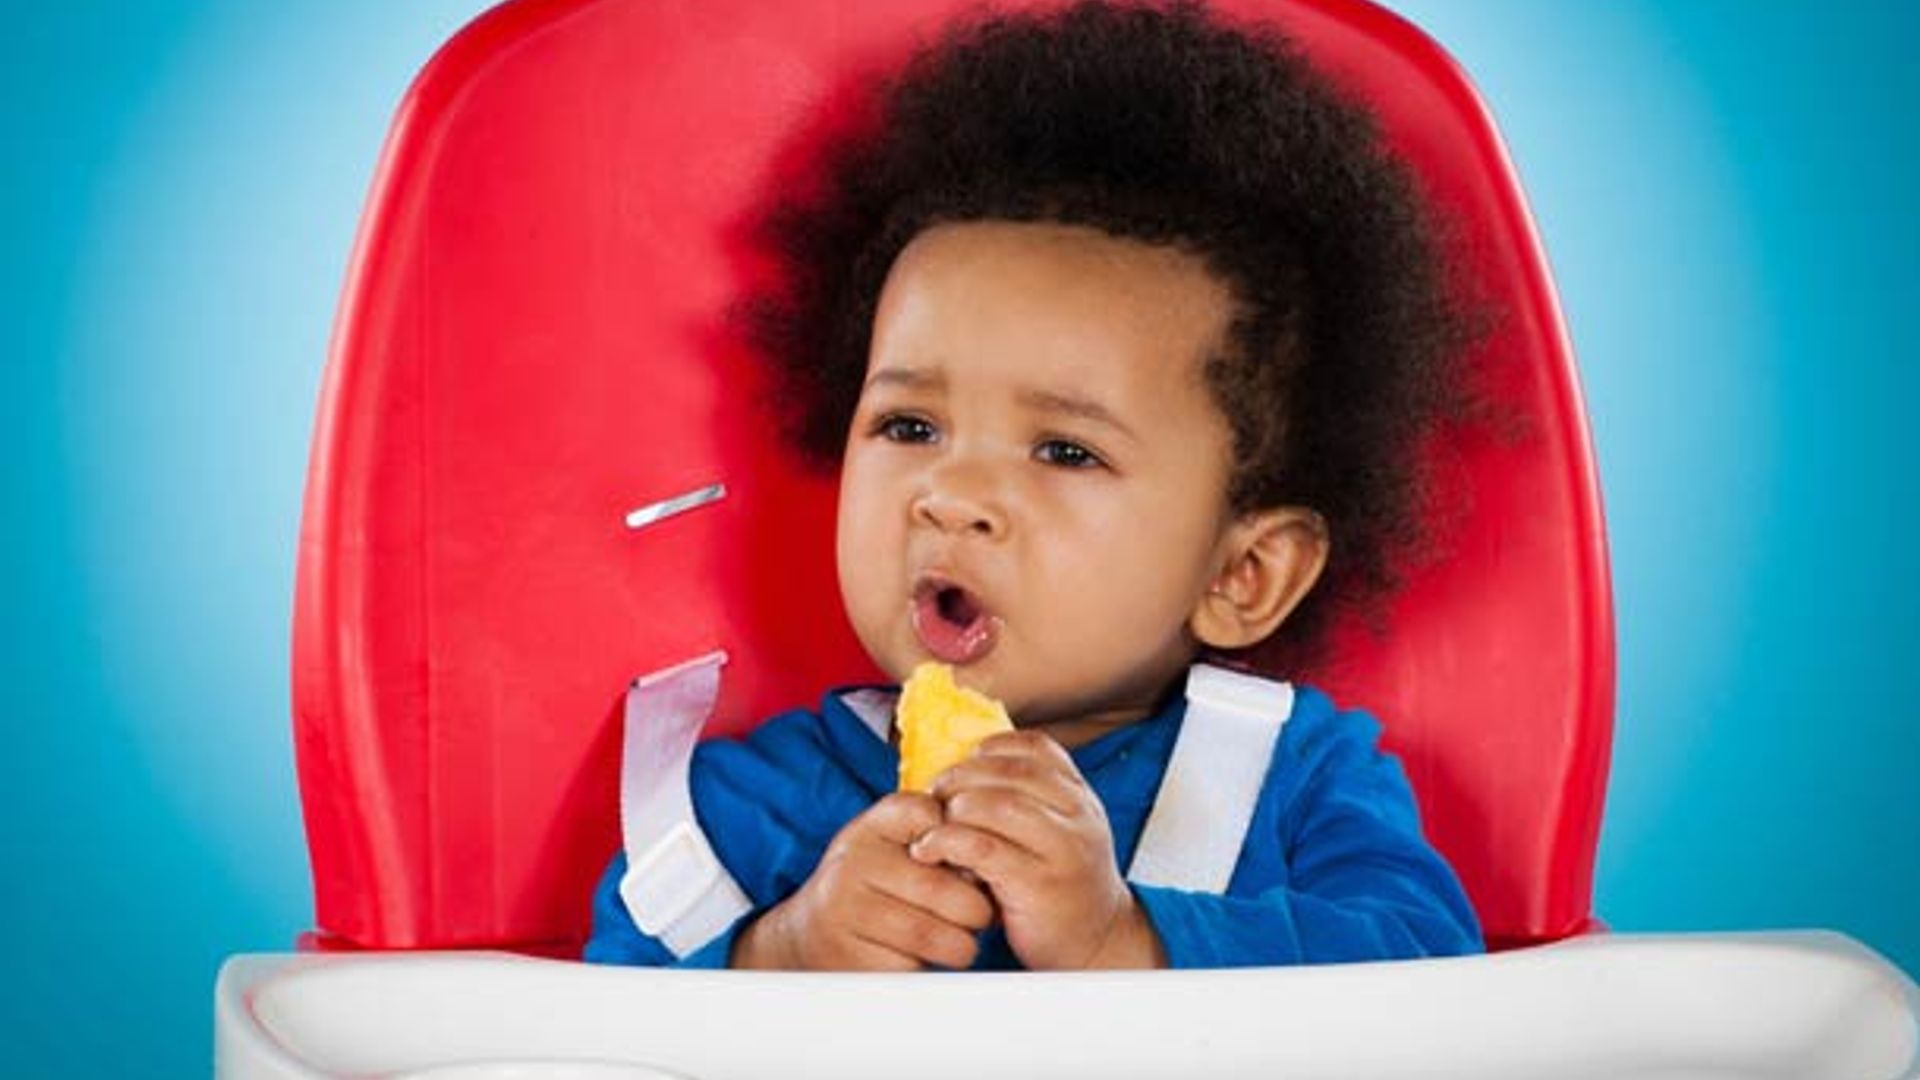 Mango and cinnamon revealed as most exciting tastes for babies